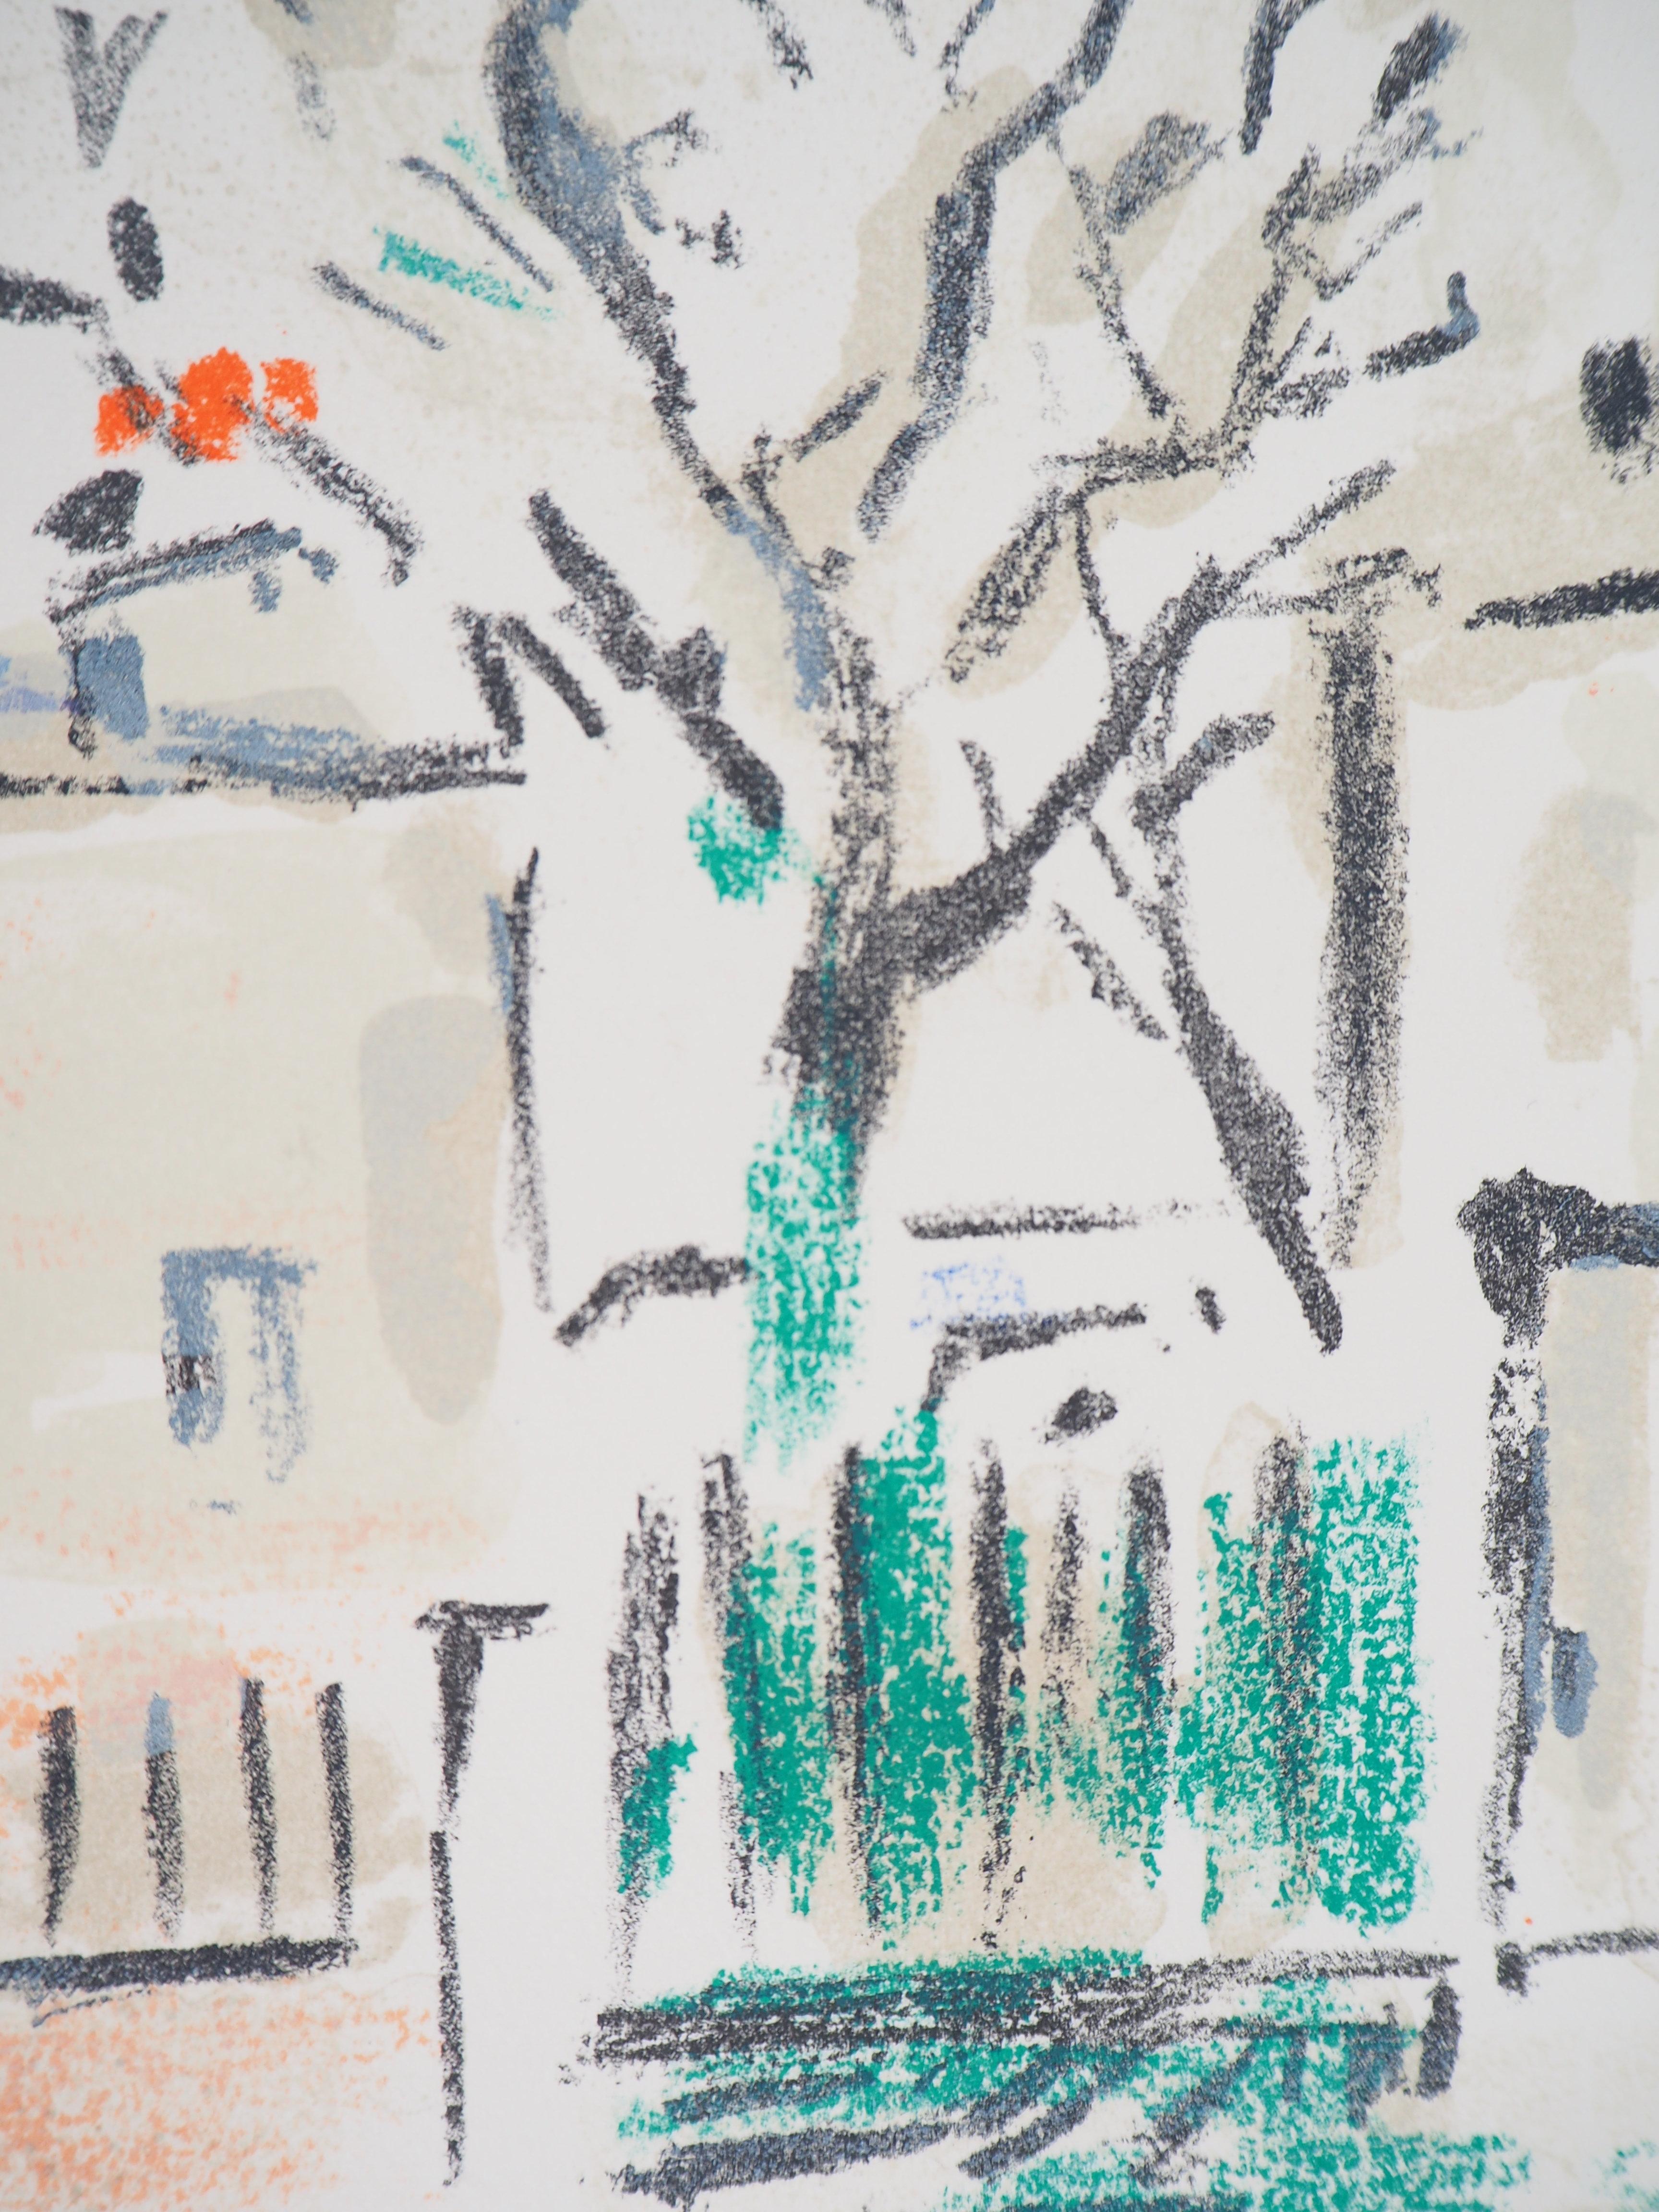 Paris : Small Square in Montmartre - Original Lithograph, Handsigned - Modern Print by Robert Savary